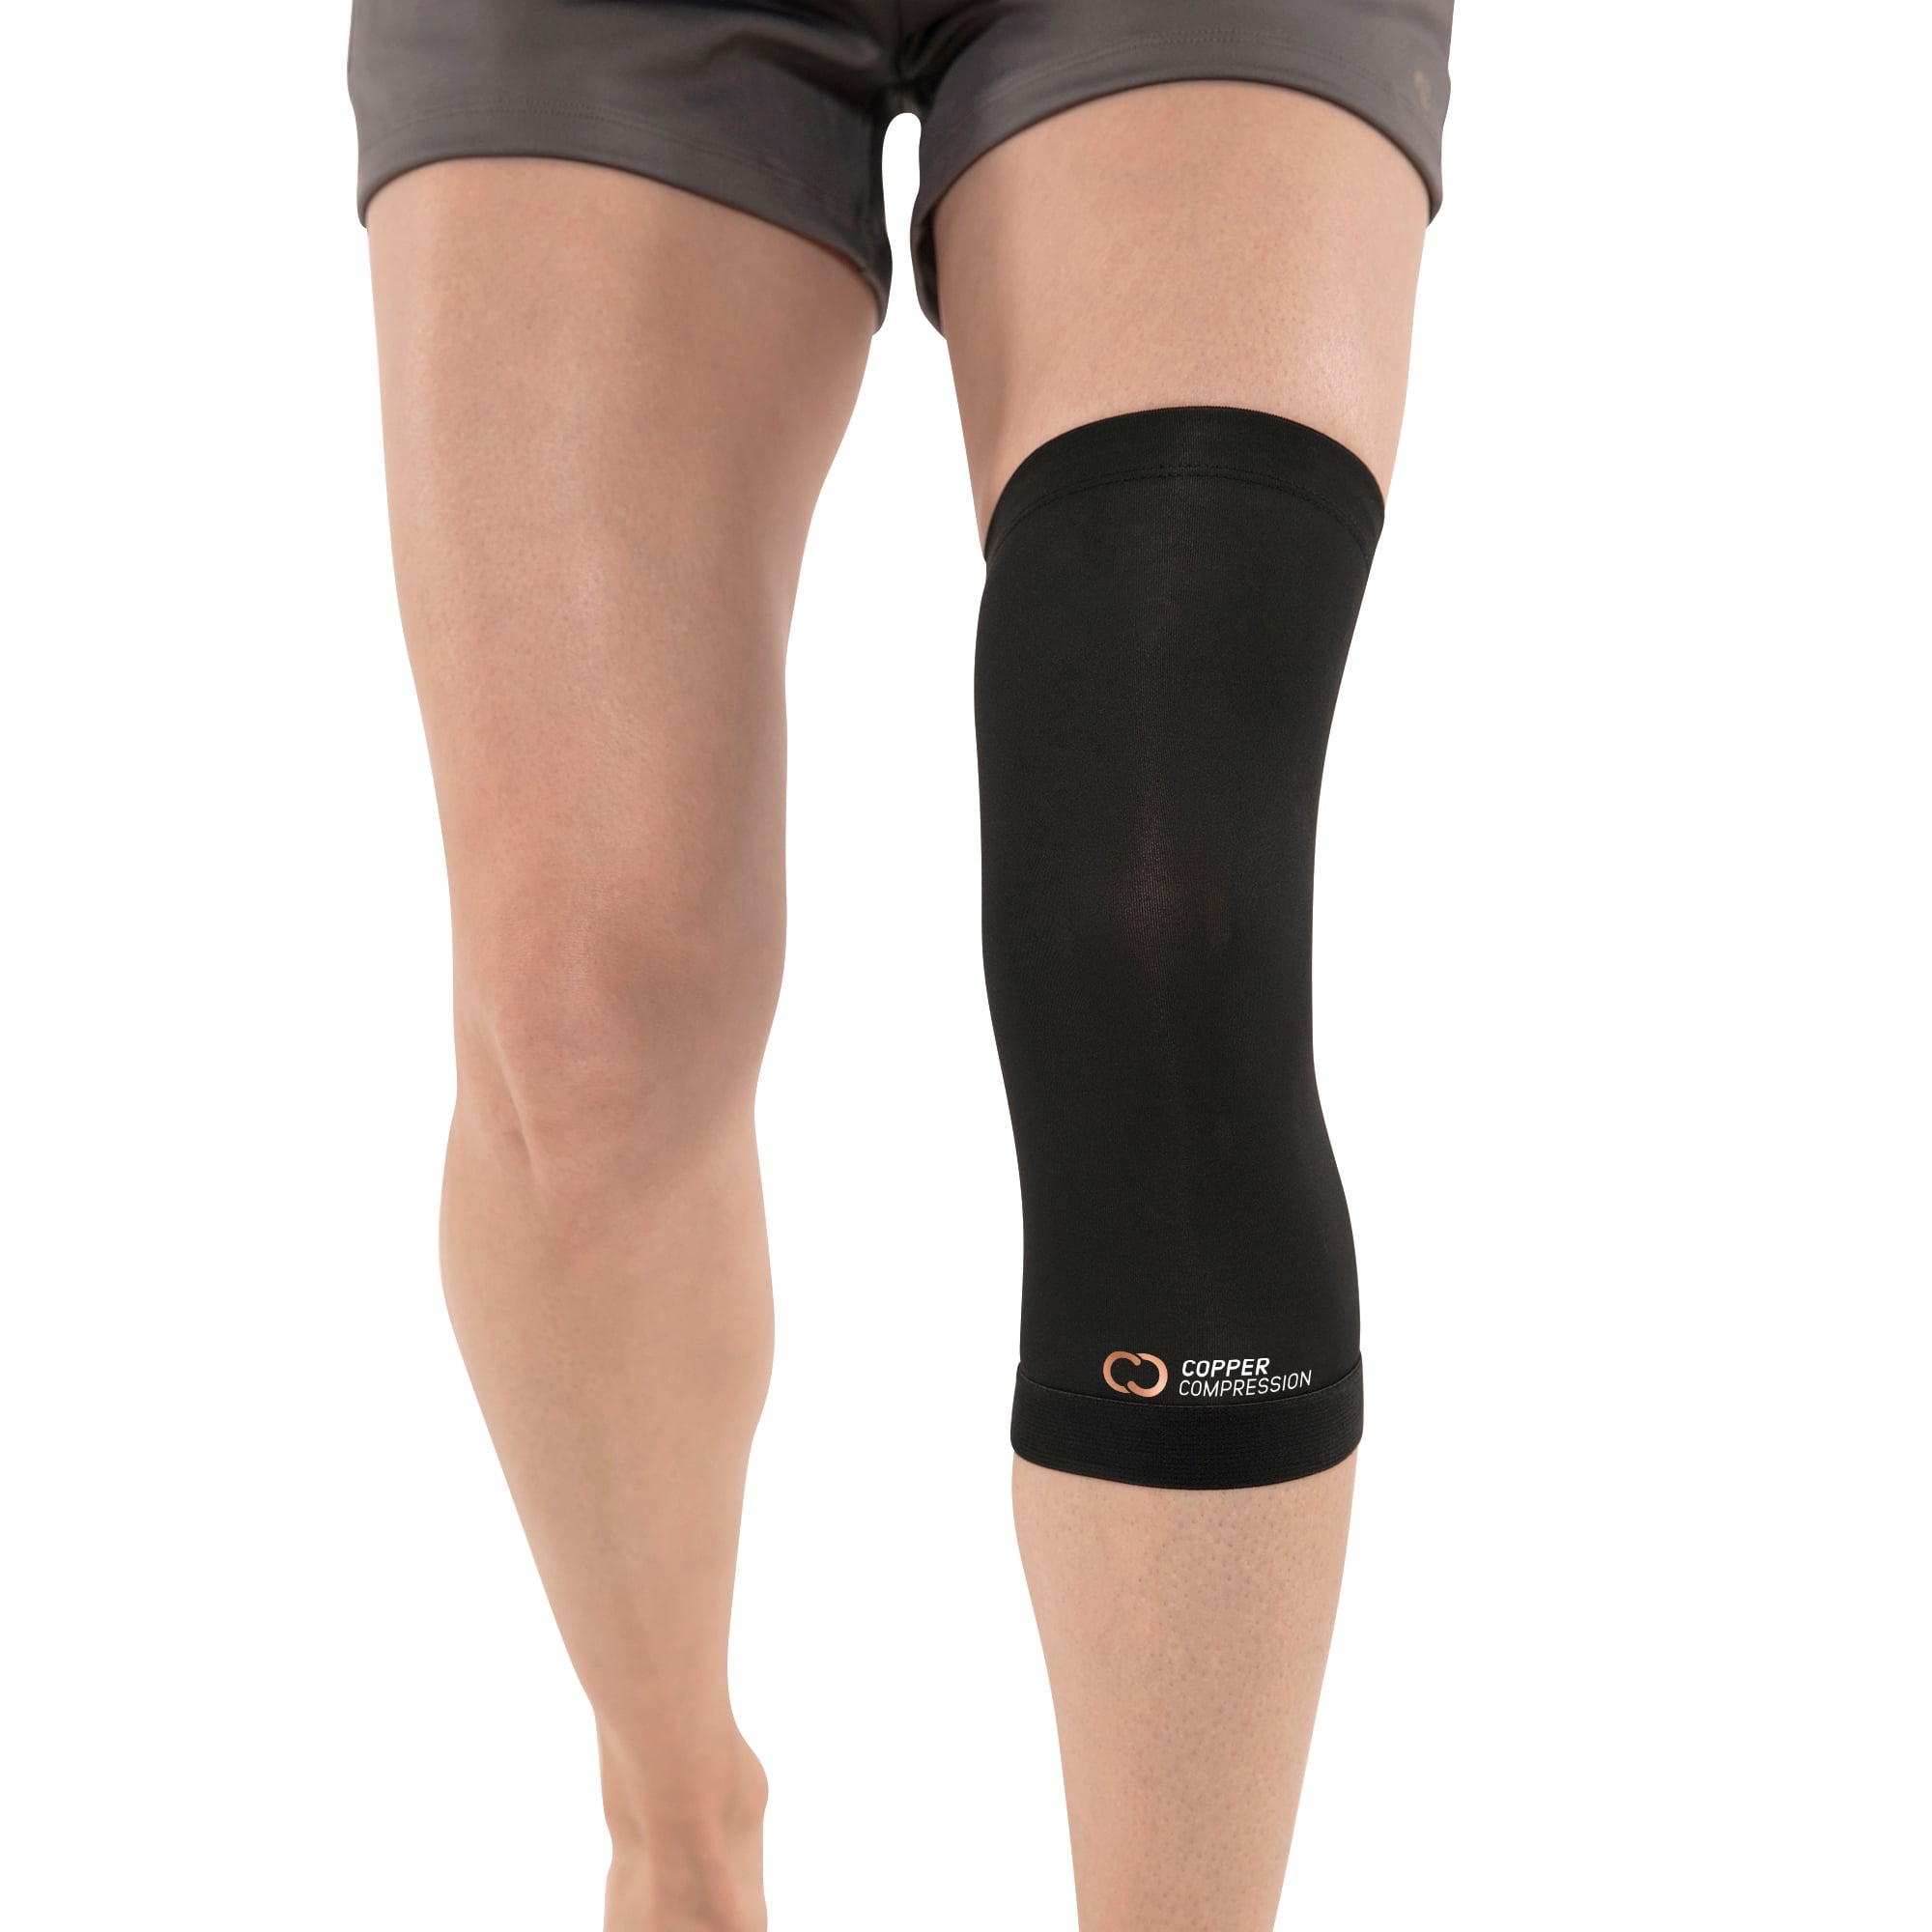 Millenti Knee Brace Compression Sleeve with Side Stabilizers & Patella Gel  Pad for Knee Pain Running, Arthritis, ACL, Basketball, Football, Gym,  Meniscus Tear, Single, Black Blue, Large, KB02LBU 